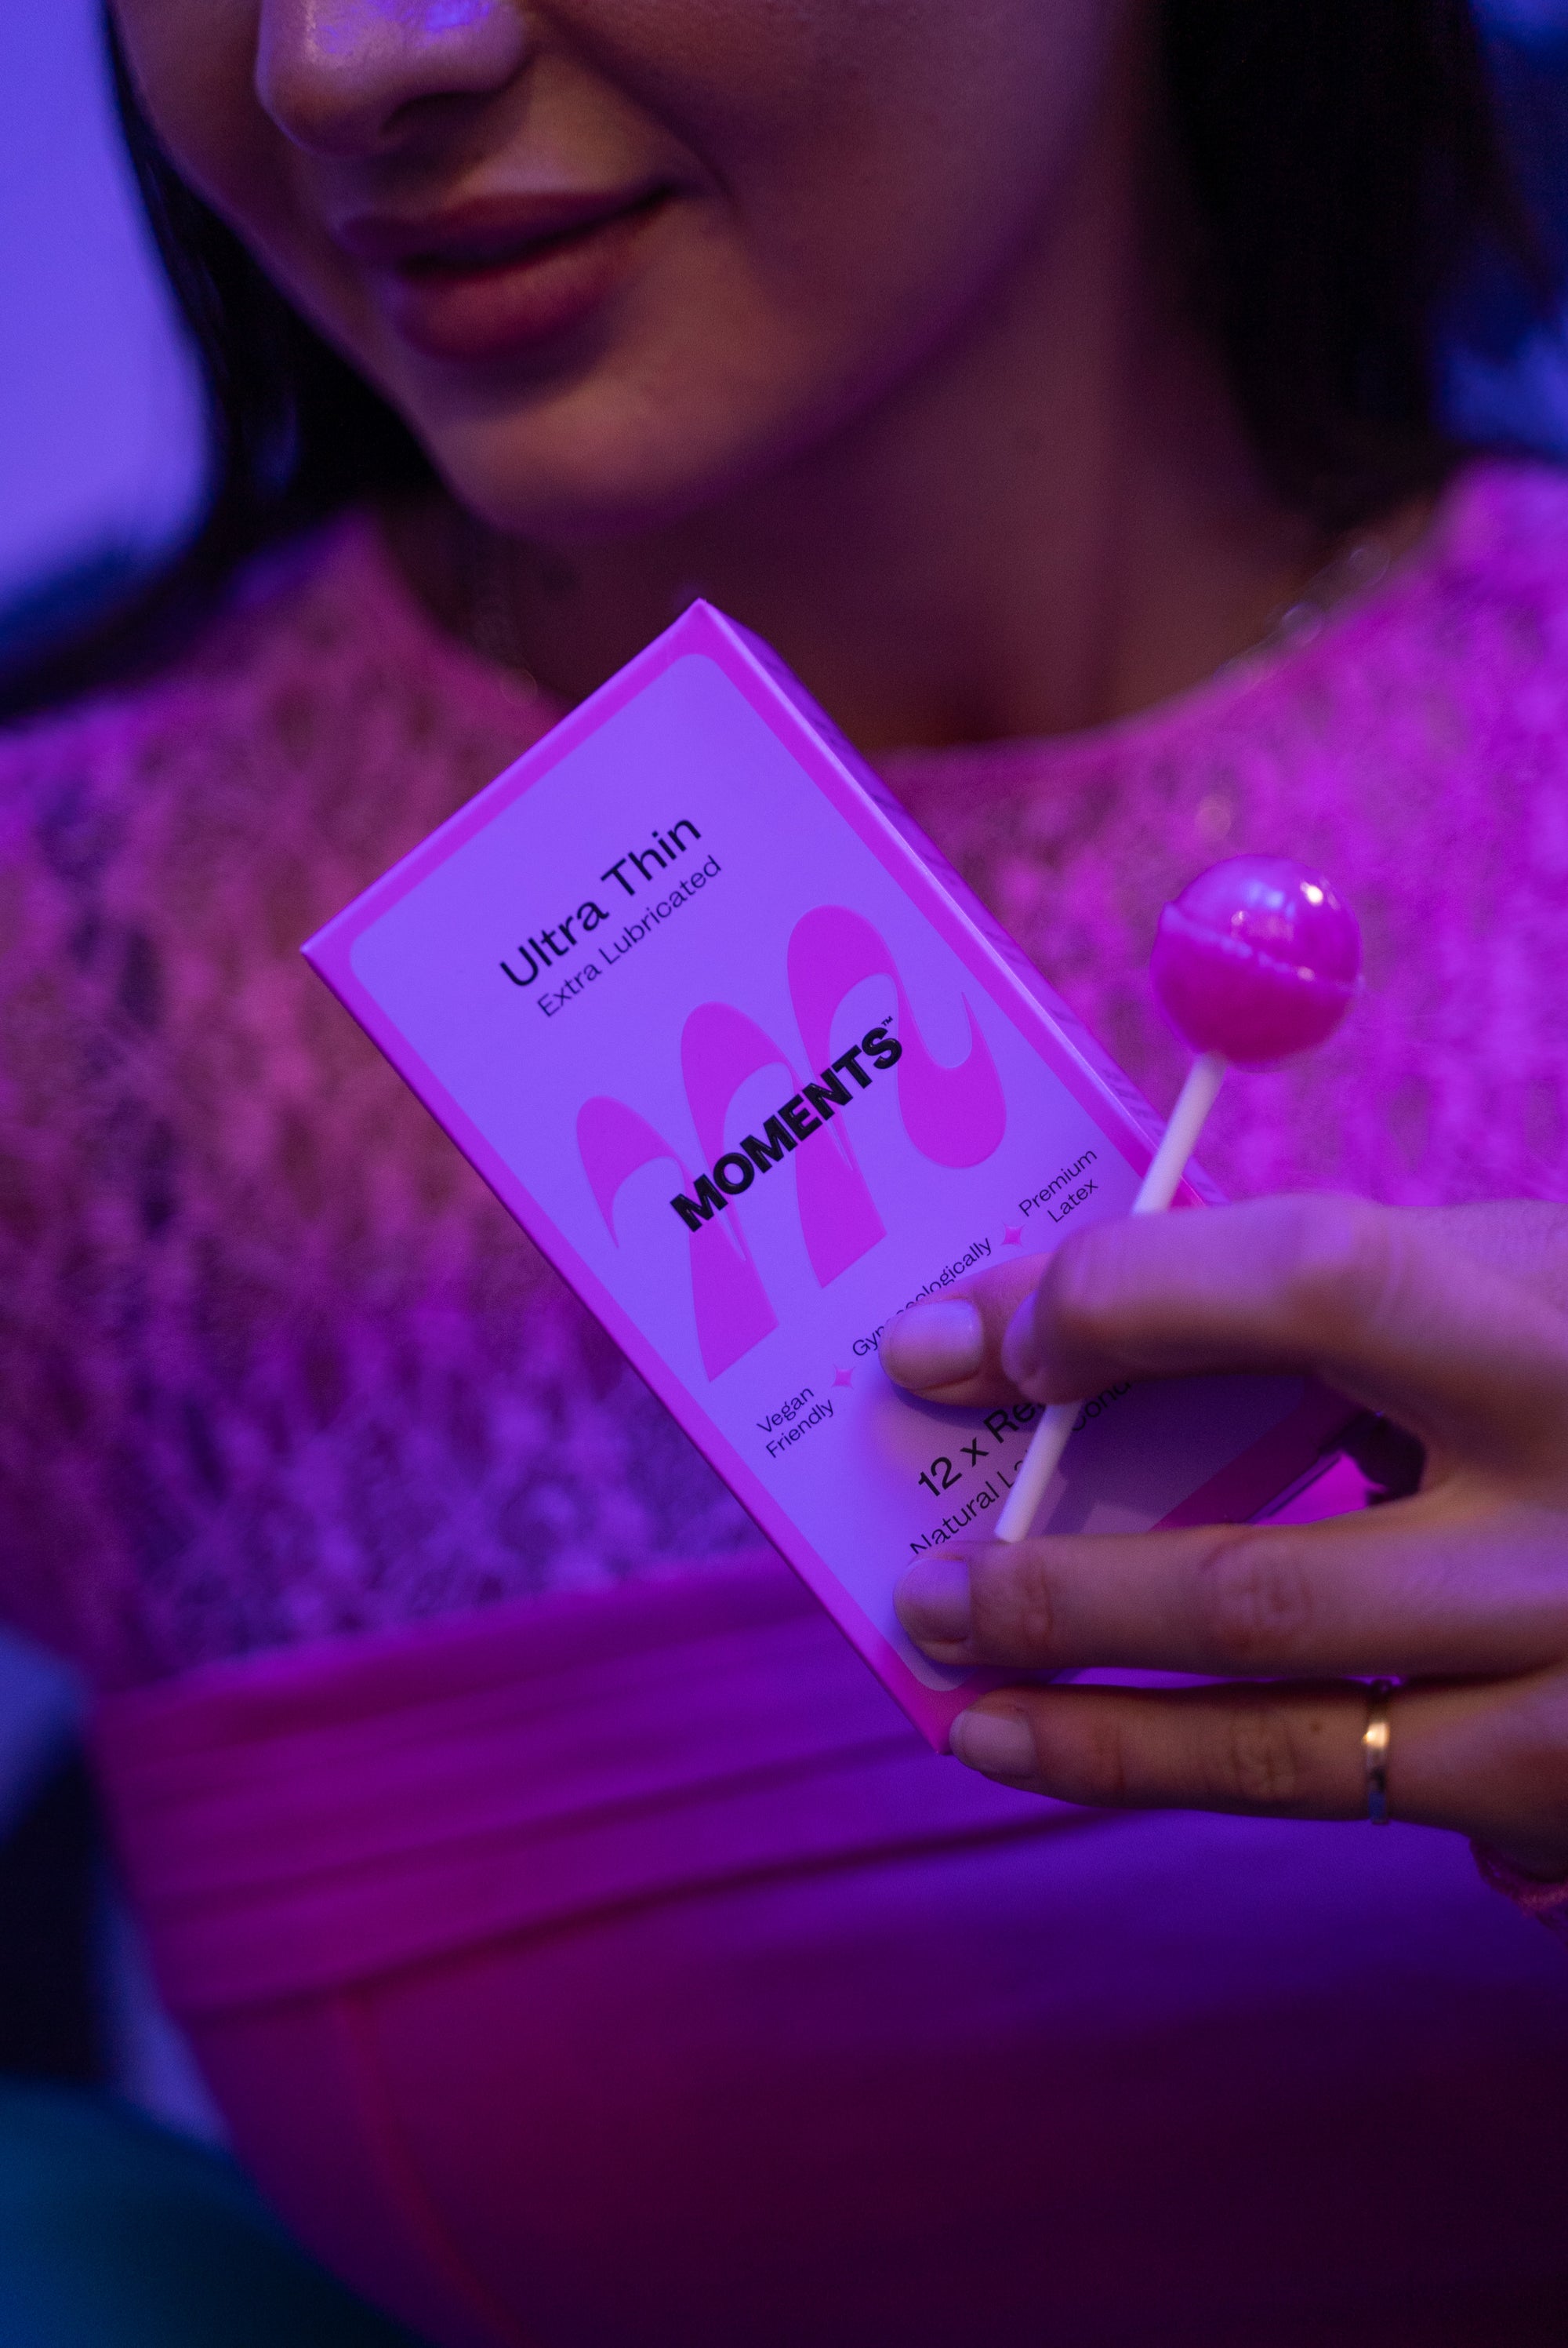 Moments Ultra Thin Regular condom product held by a woman with a subtle pink aesthetic